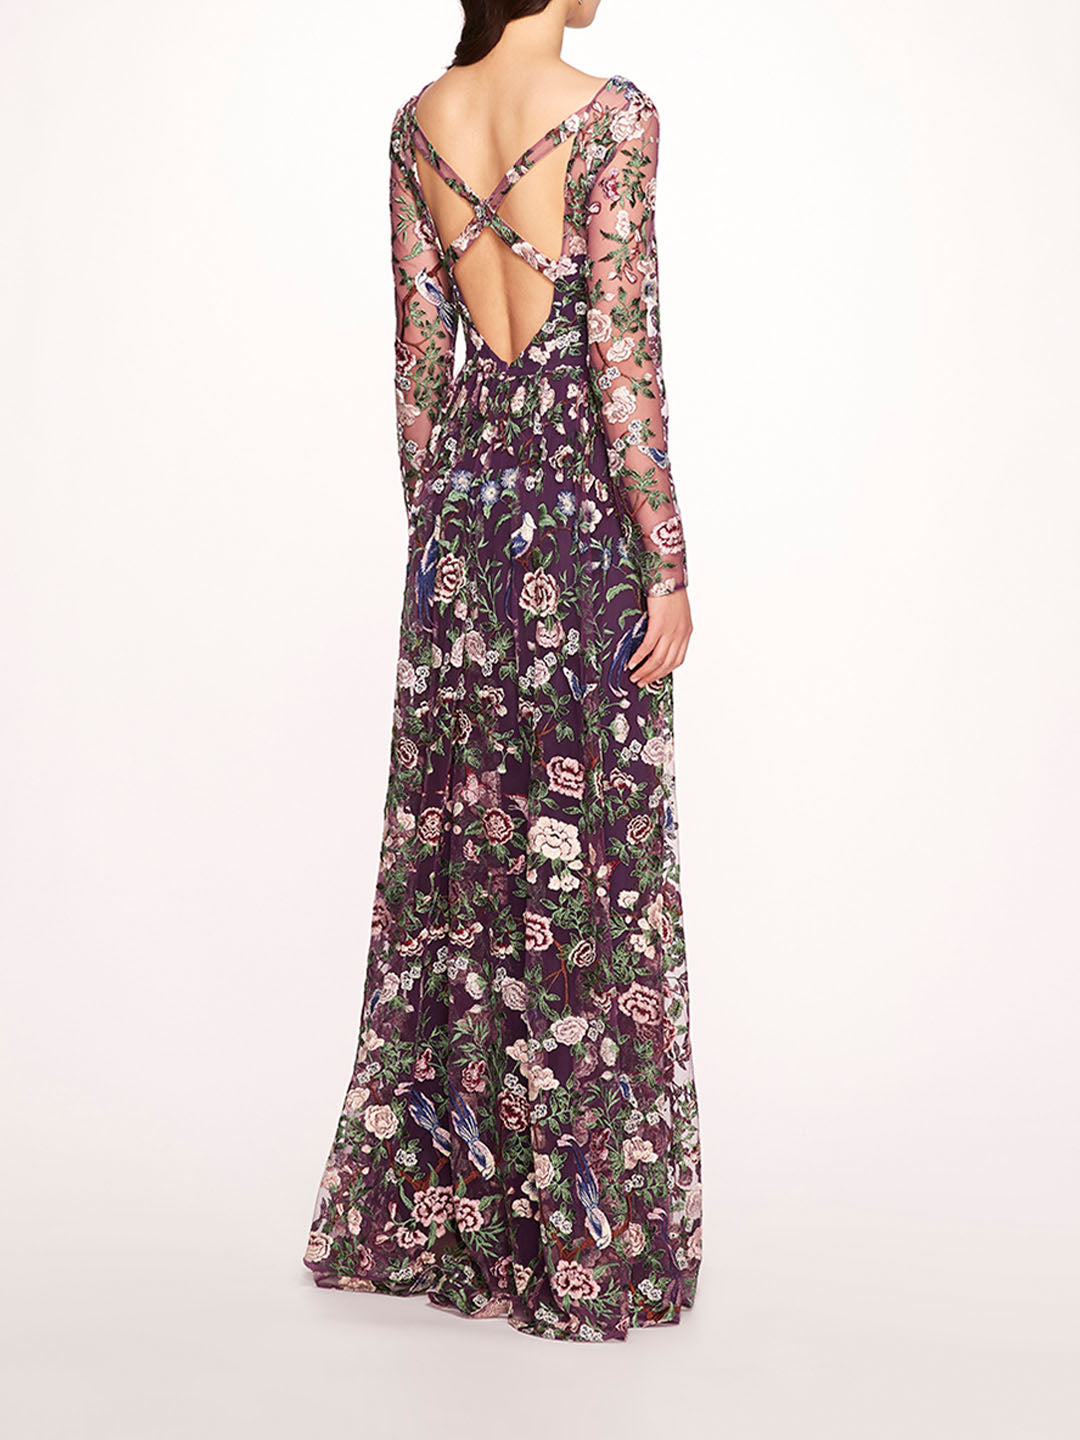 Botanical Embroidered Gown | Marchesa